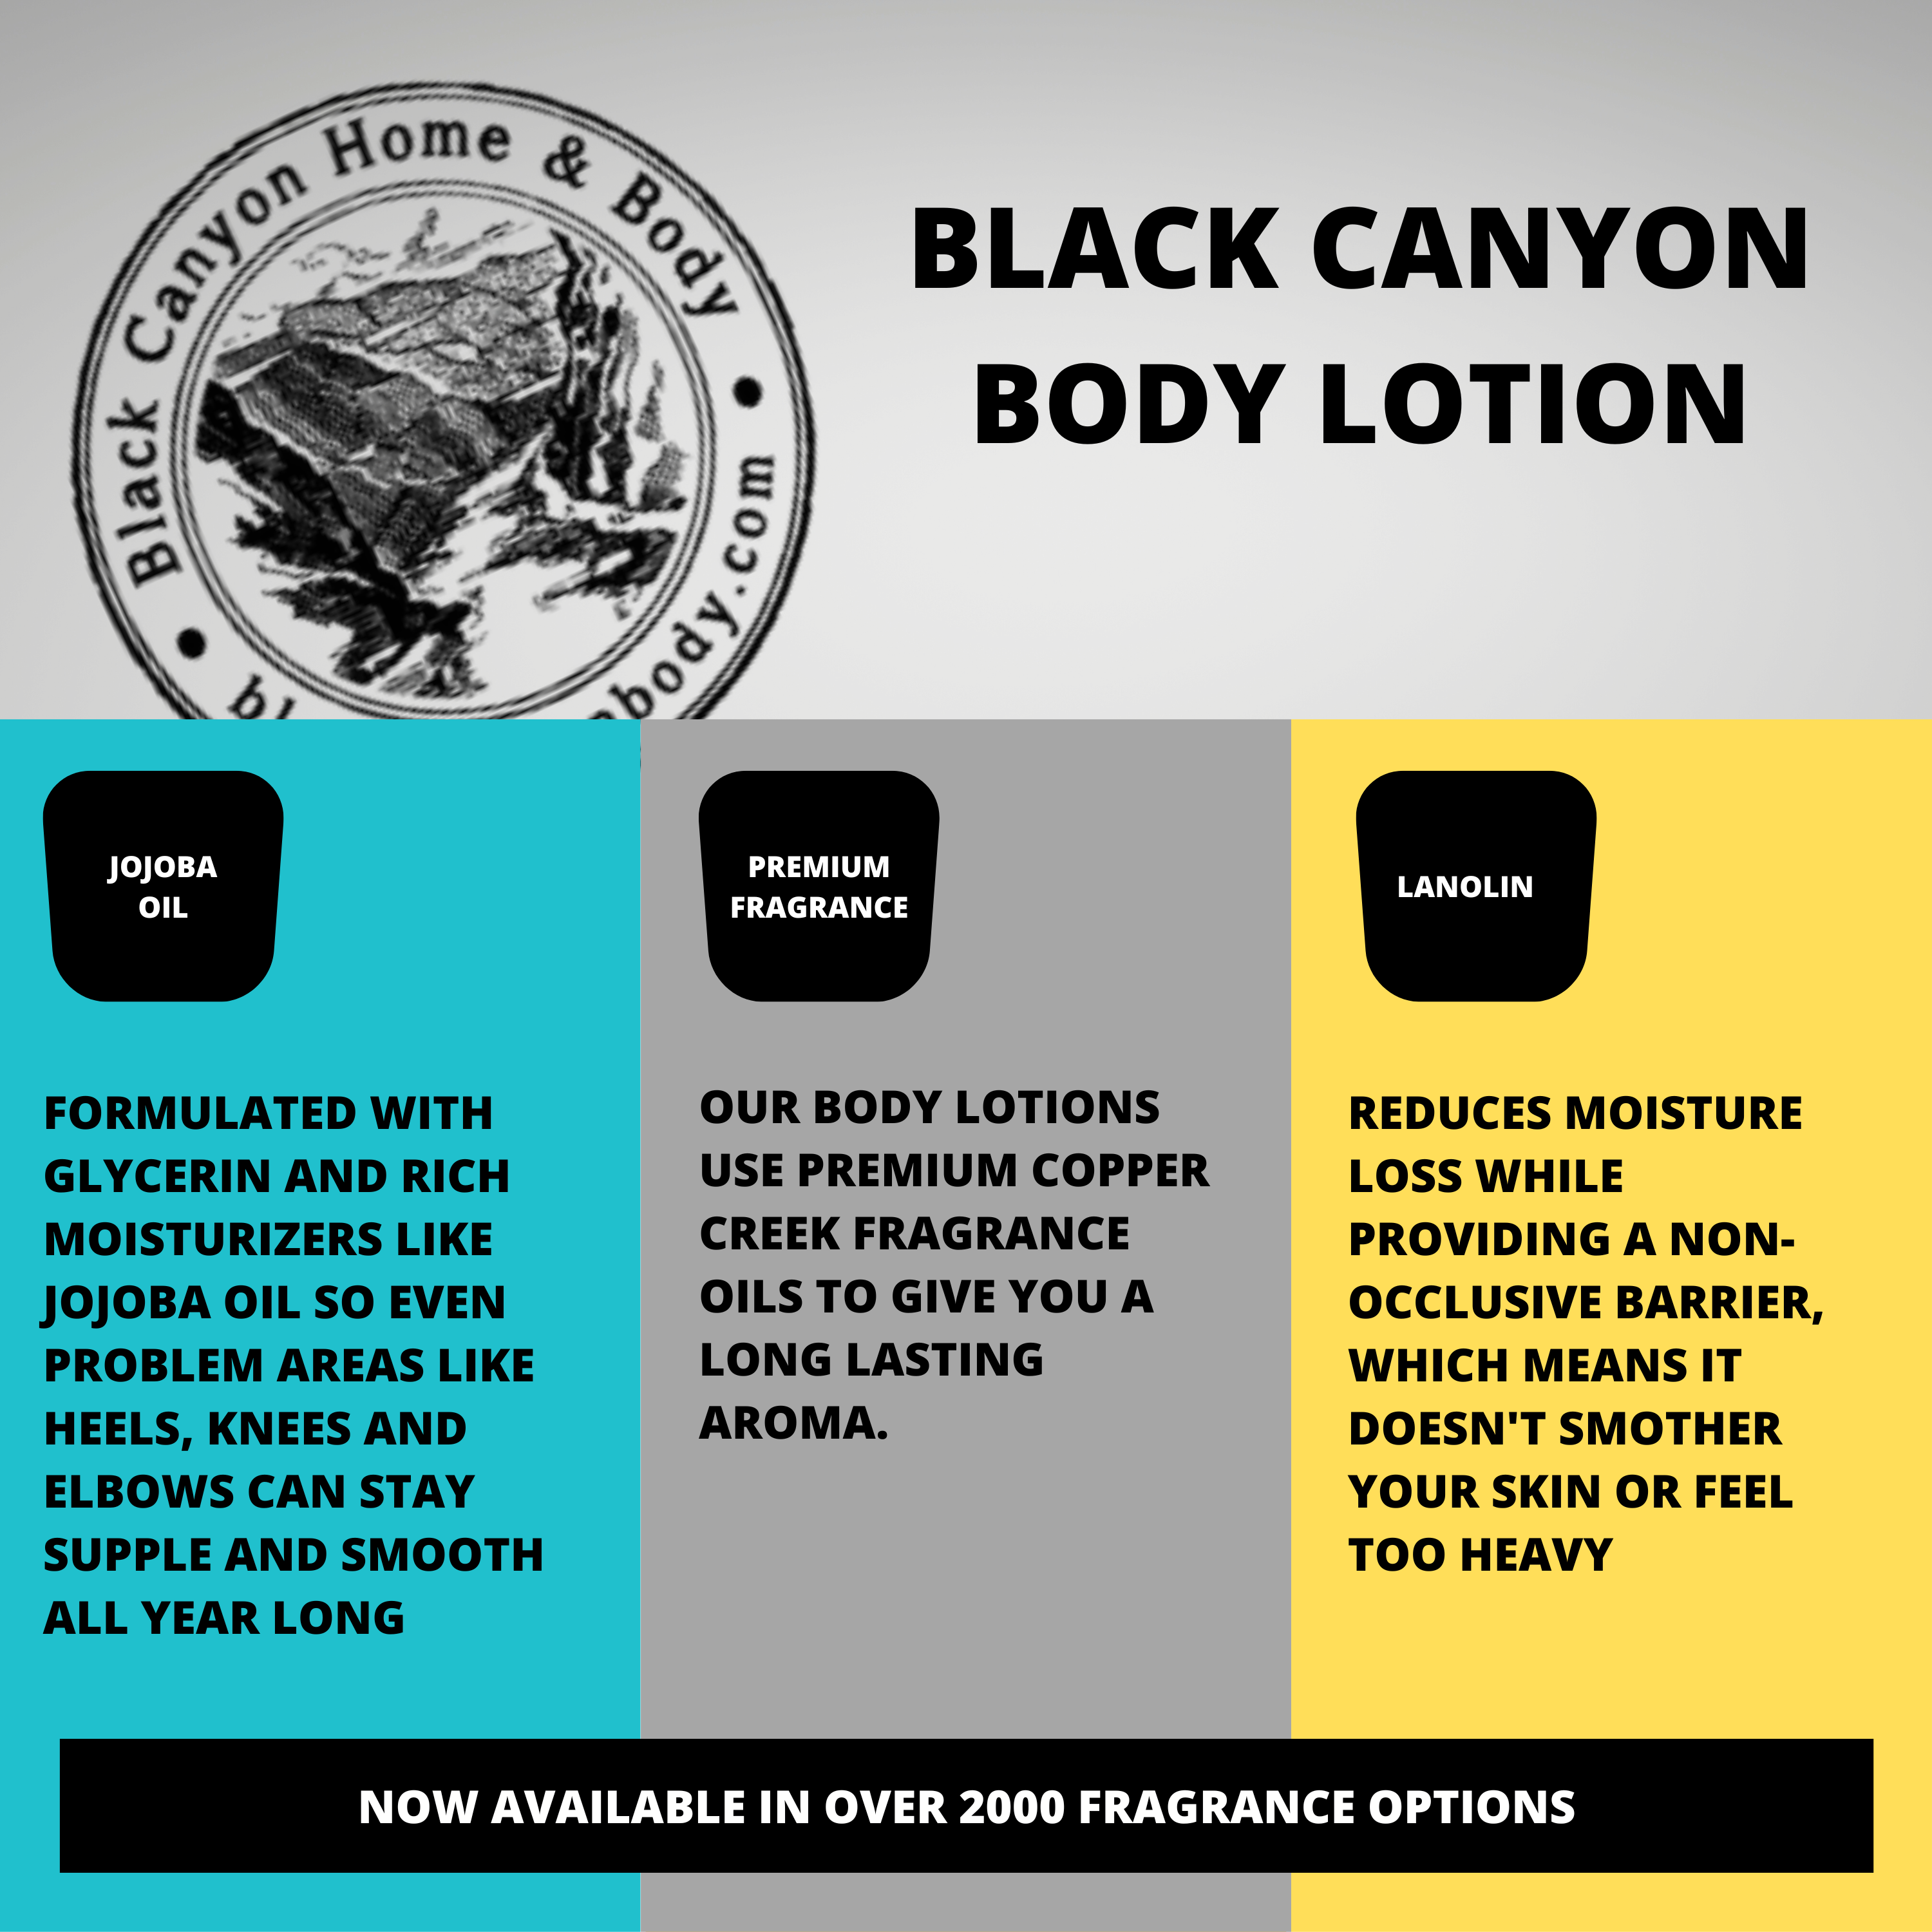 Black Canyon Black Currant & Cognac Scented Luxury Body Lotion with Lanolin and Jojoba Oil